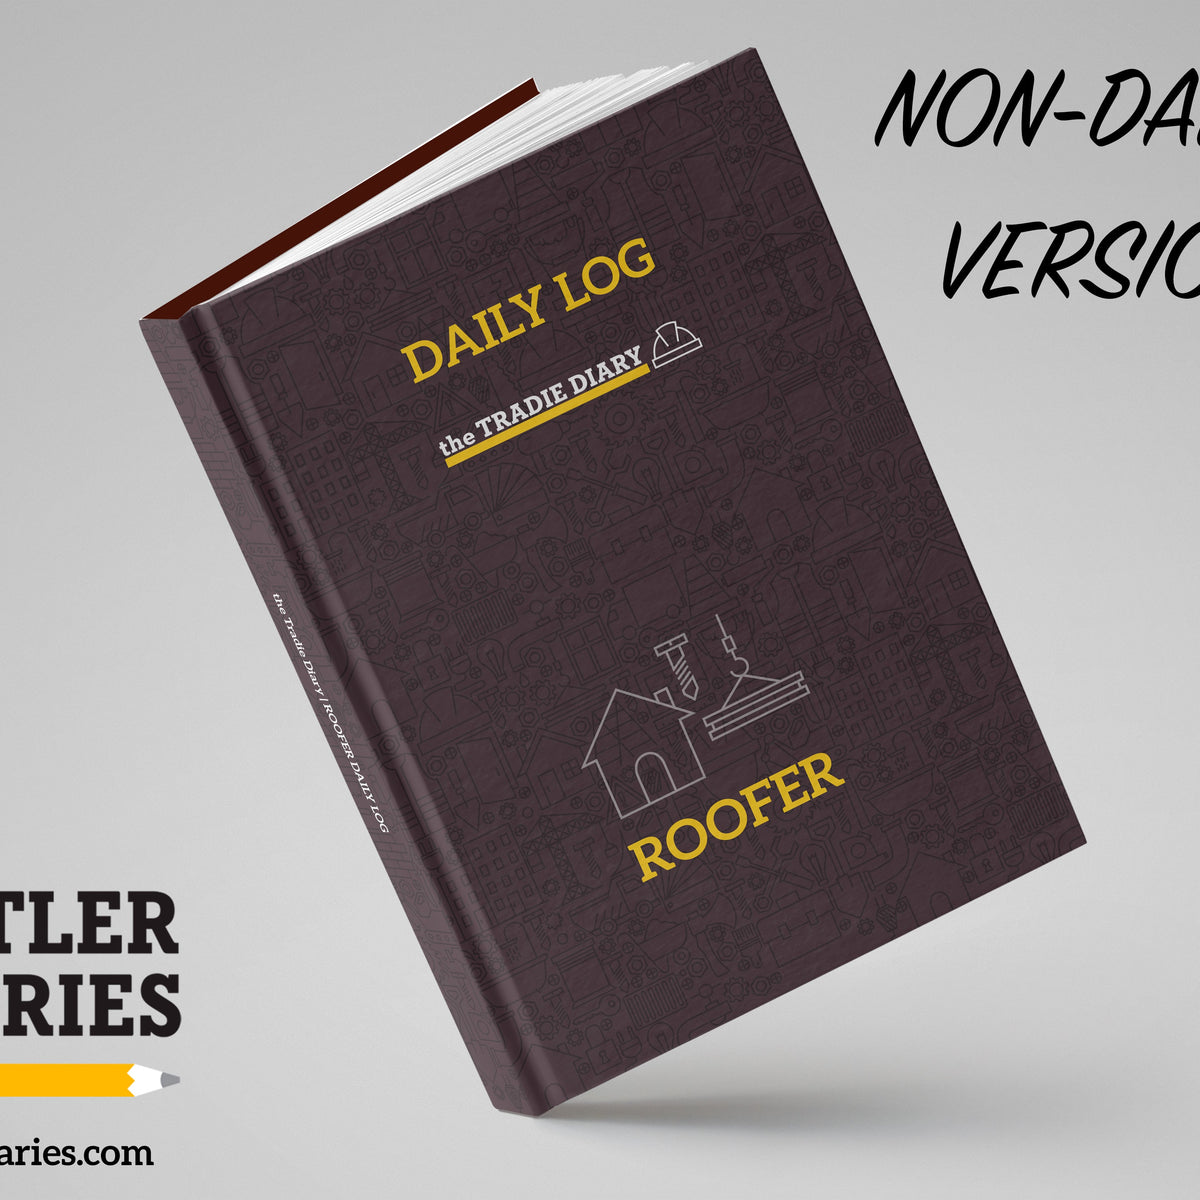 The Tradie Diary: ROOFER DAILY LOG - NON DATED - Butler Diaries